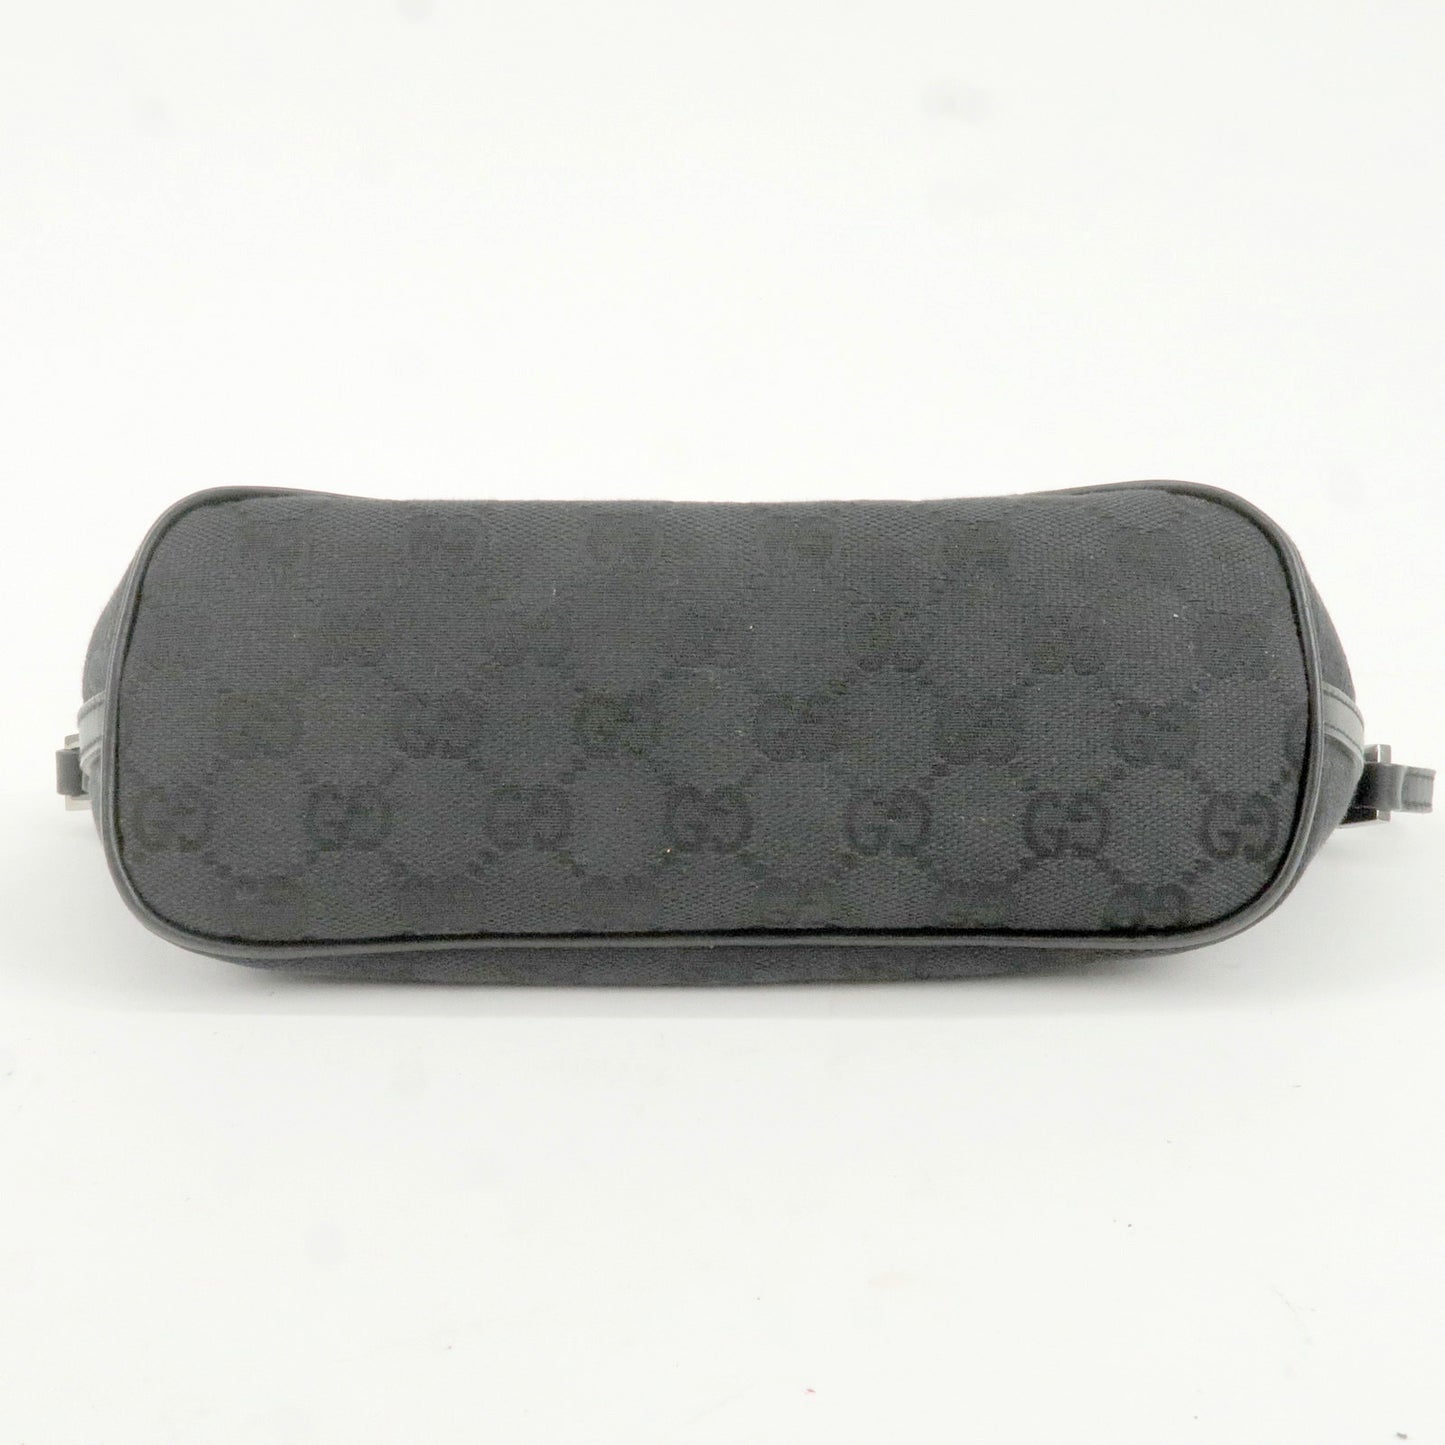 GUCCI GG Canvas Leather Pouch Boat Bag Hand Bag Black 07198